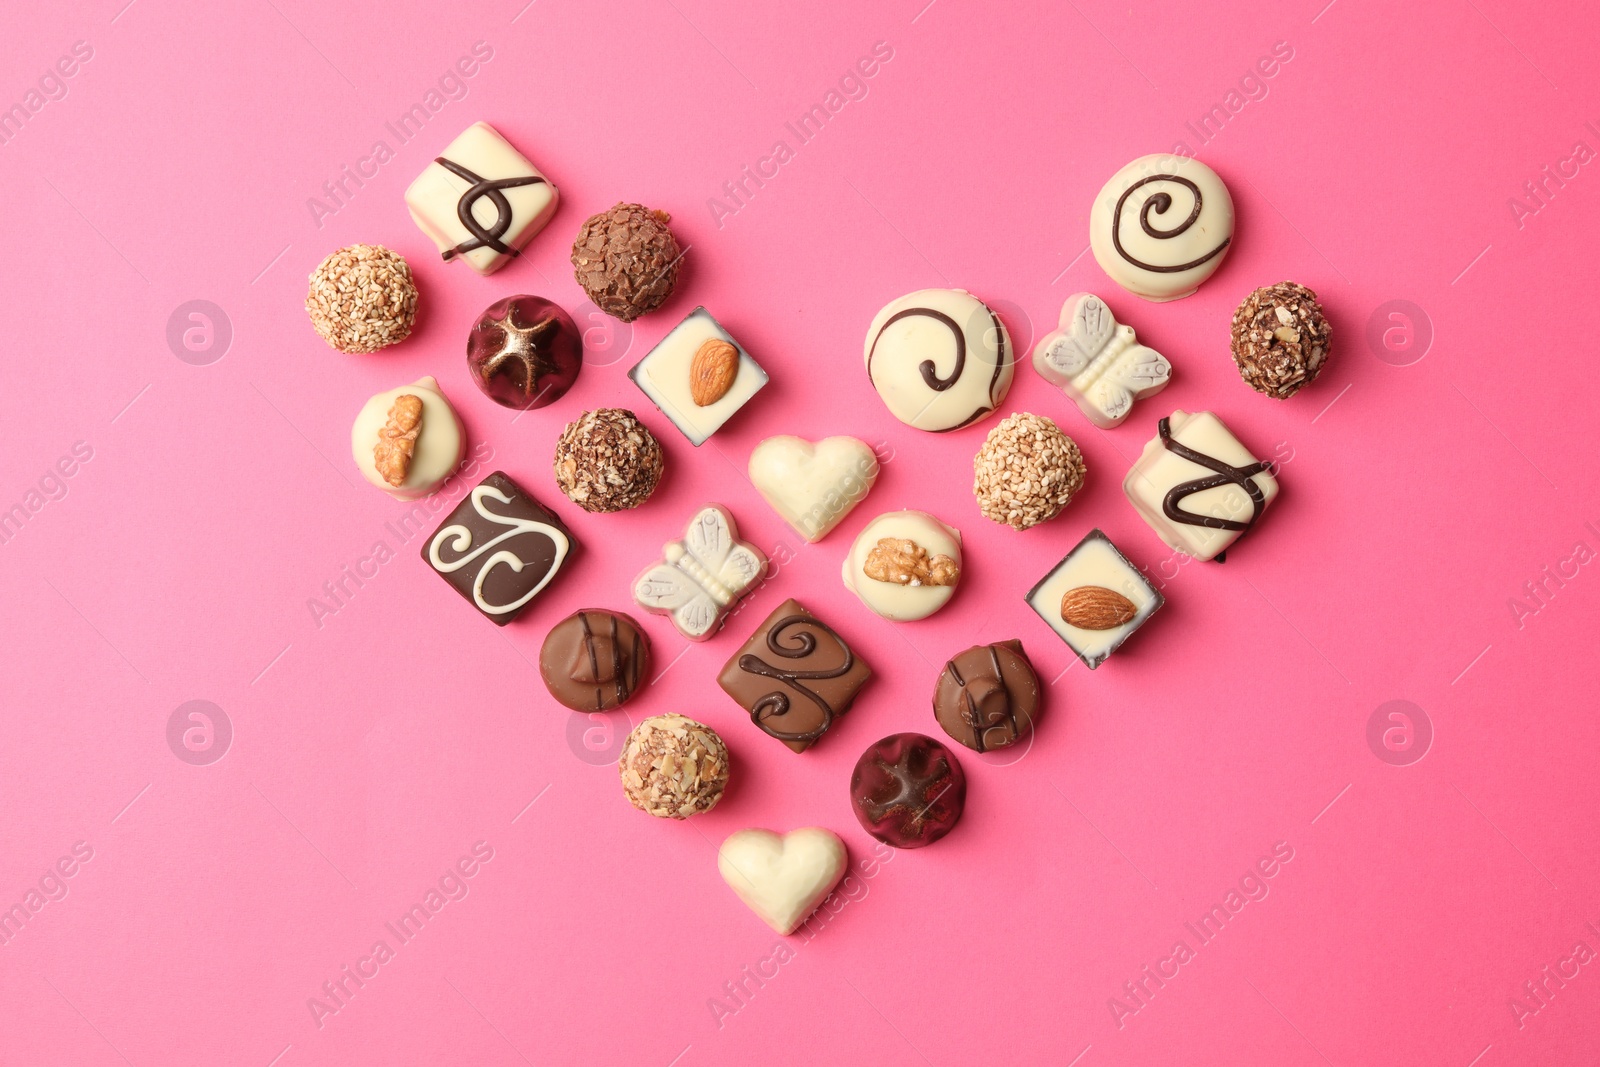 Photo of Heart made with delicious chocolate candies on pink background, top view